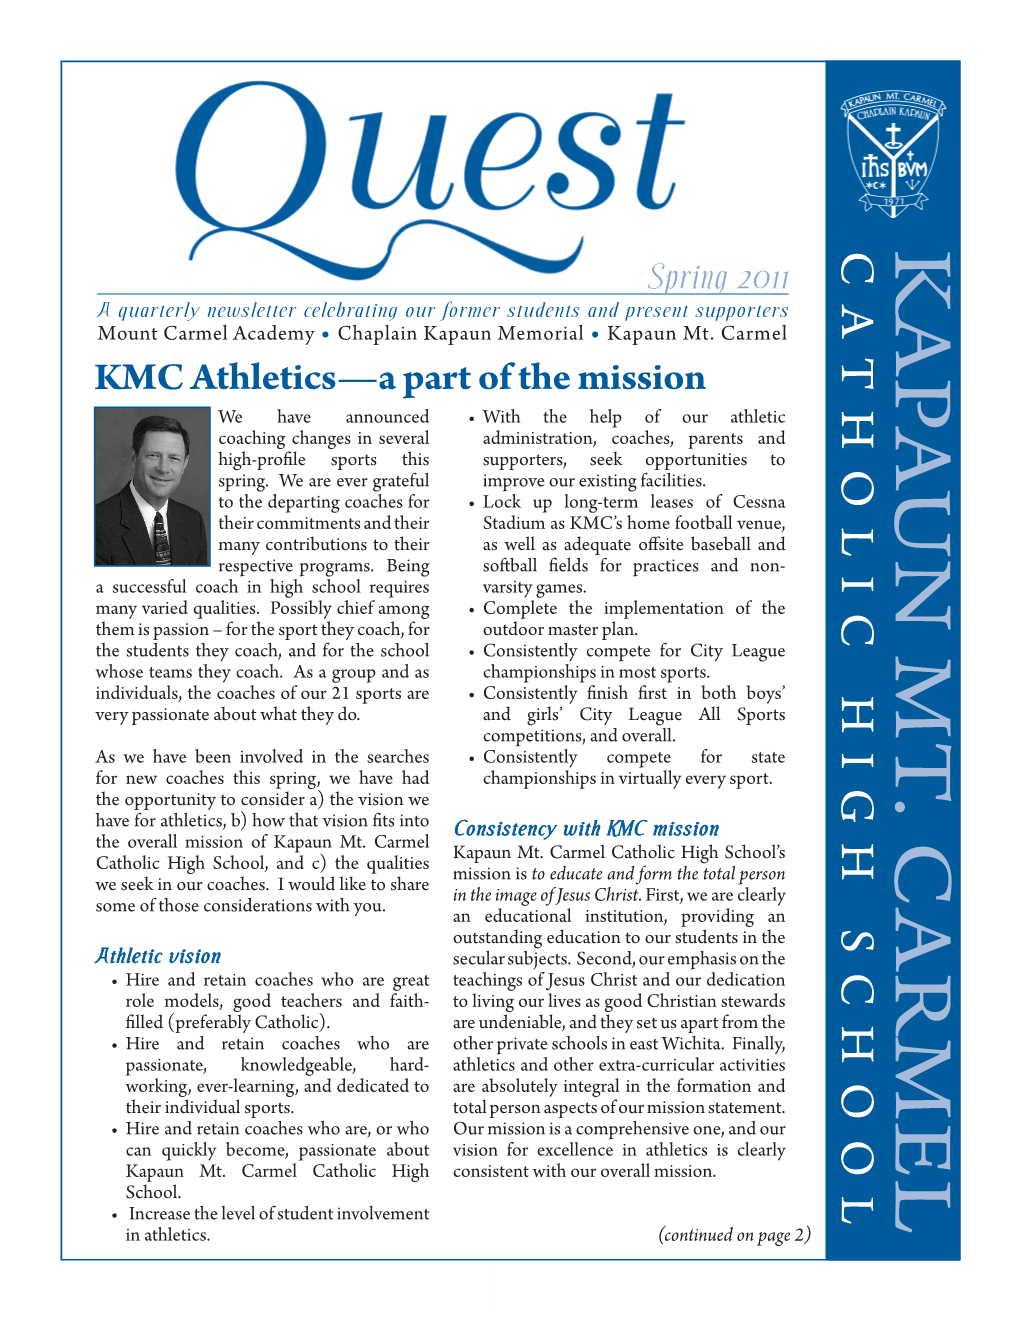 Spring 2011 a Quarterly Newsletter Celebrating Our Former Students and Present Supporters Mount Carmel Academy • Chaplain Kapaun Memorial • Kapaun Mt